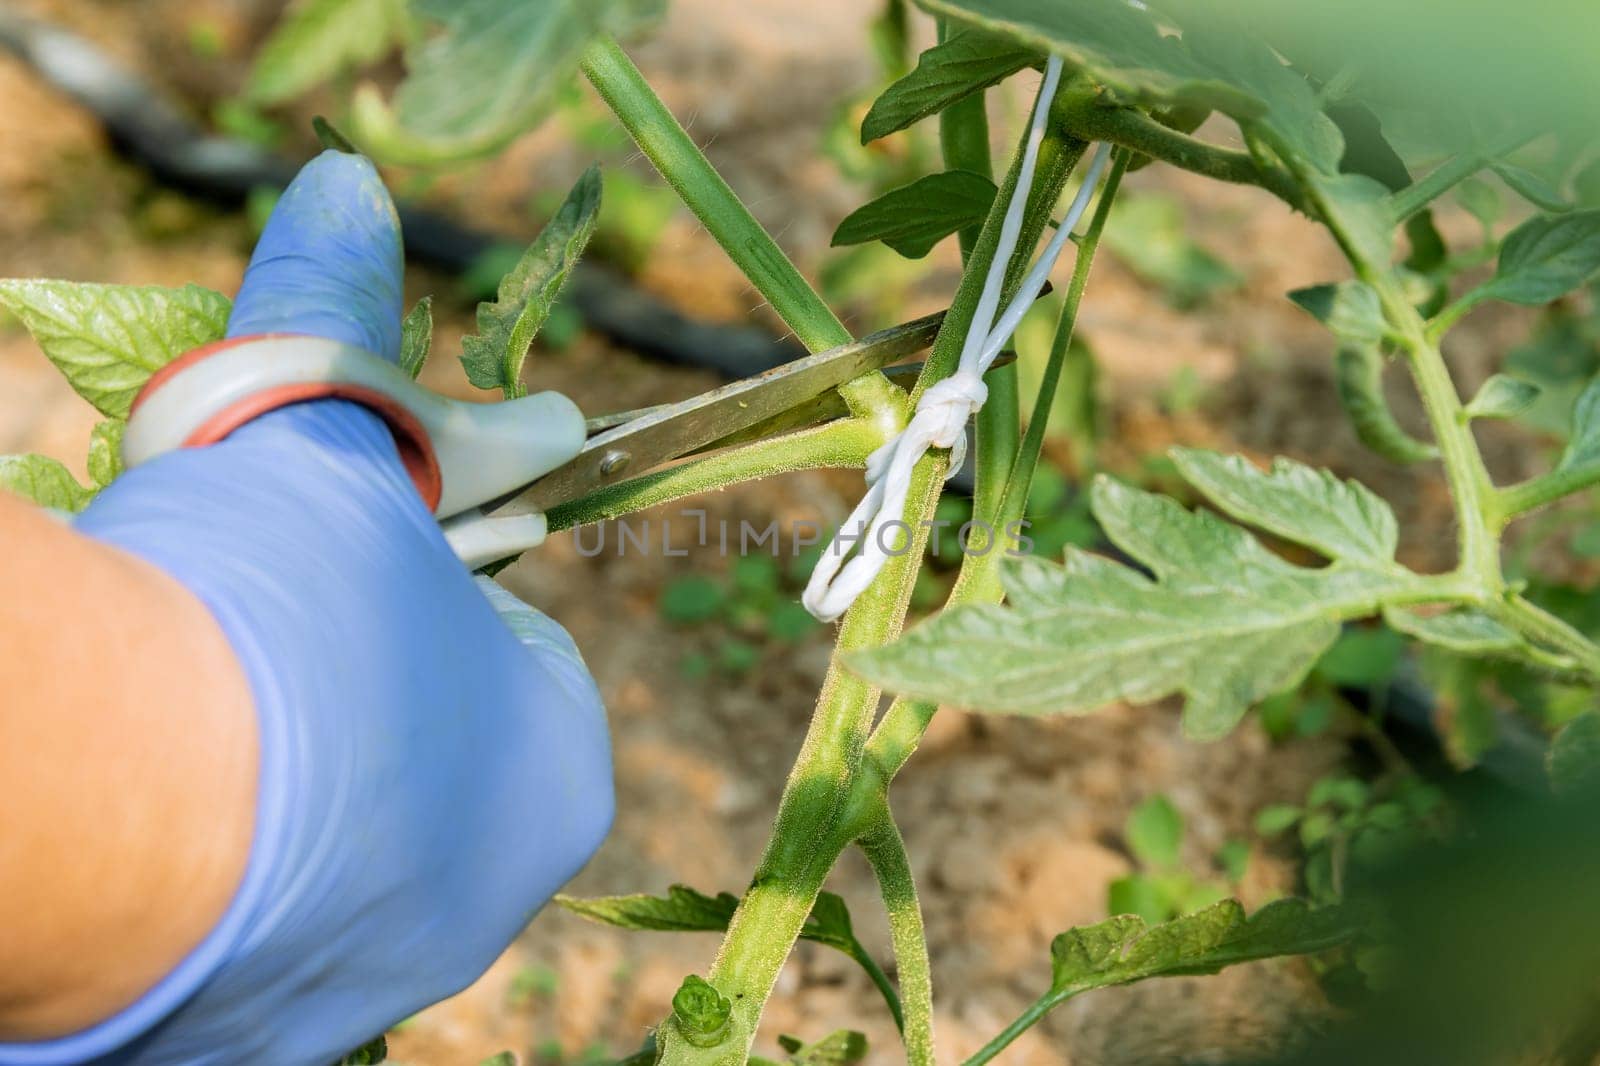 Proper timing of tomato pruning can help maximize fruit set and quality. by Yaroslav